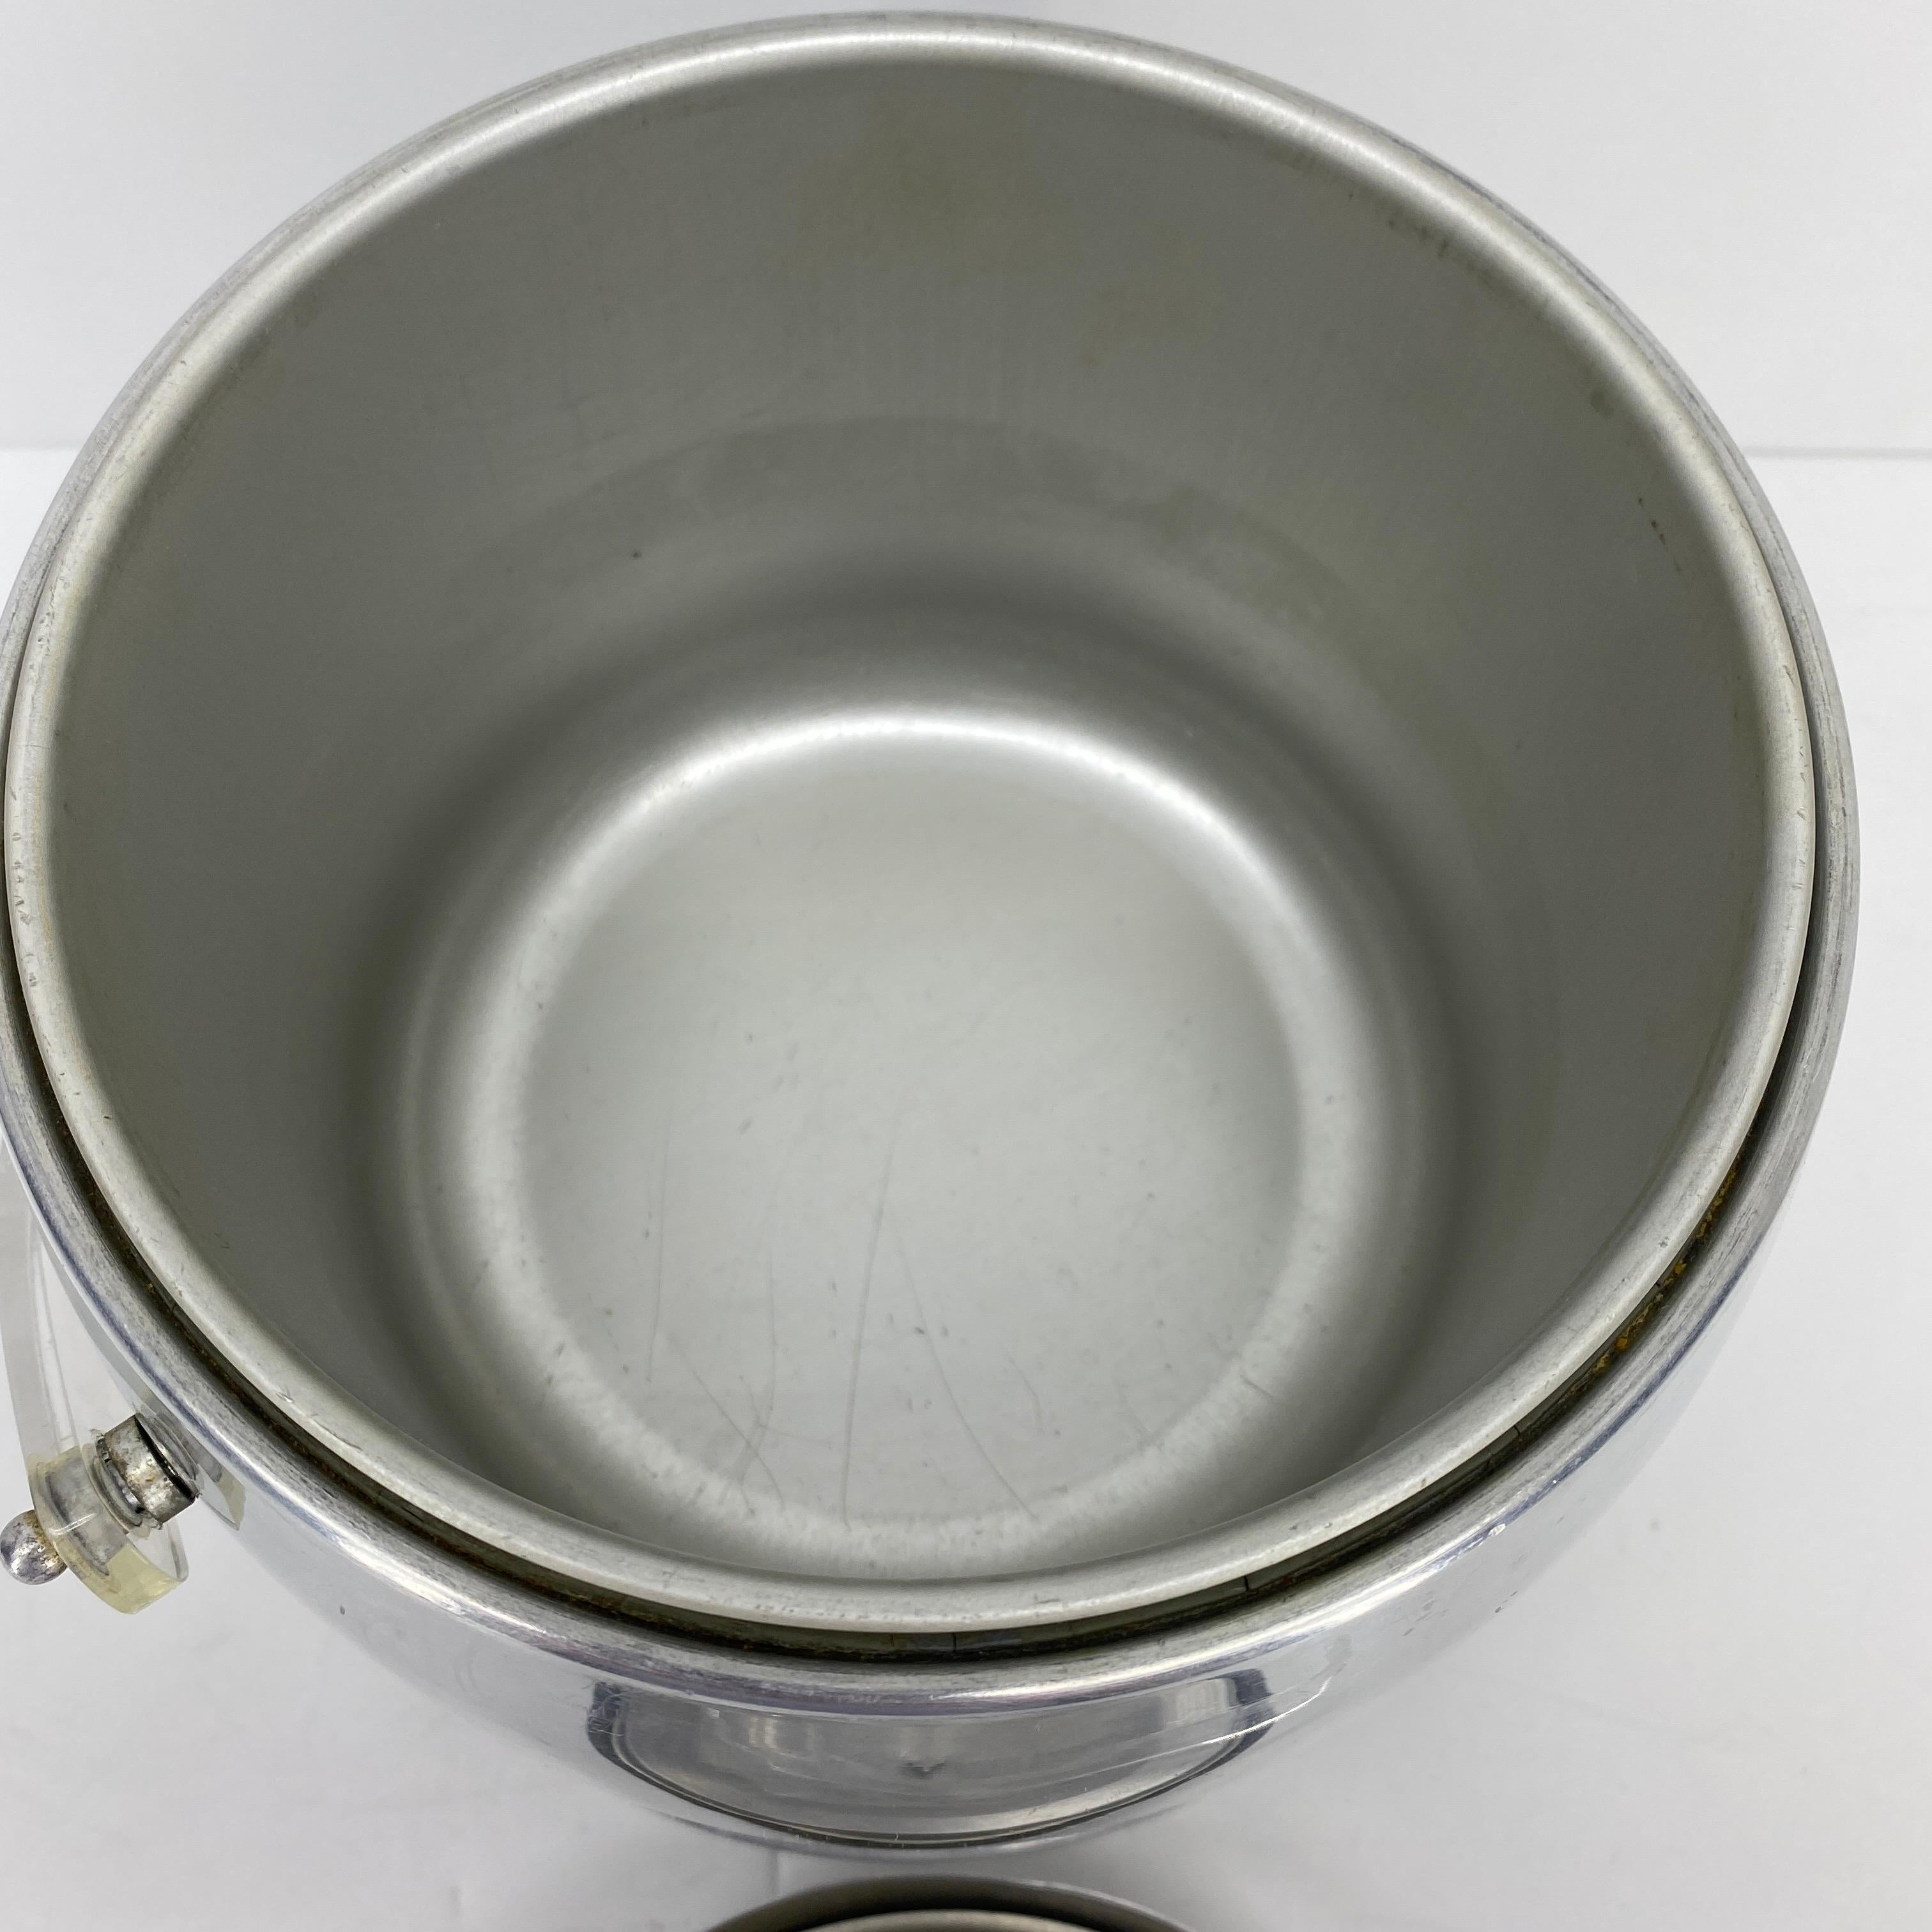 Vintage Mid-Century Modern Aluminum and Lucite Ice Bucket and Tongs For Sale 8